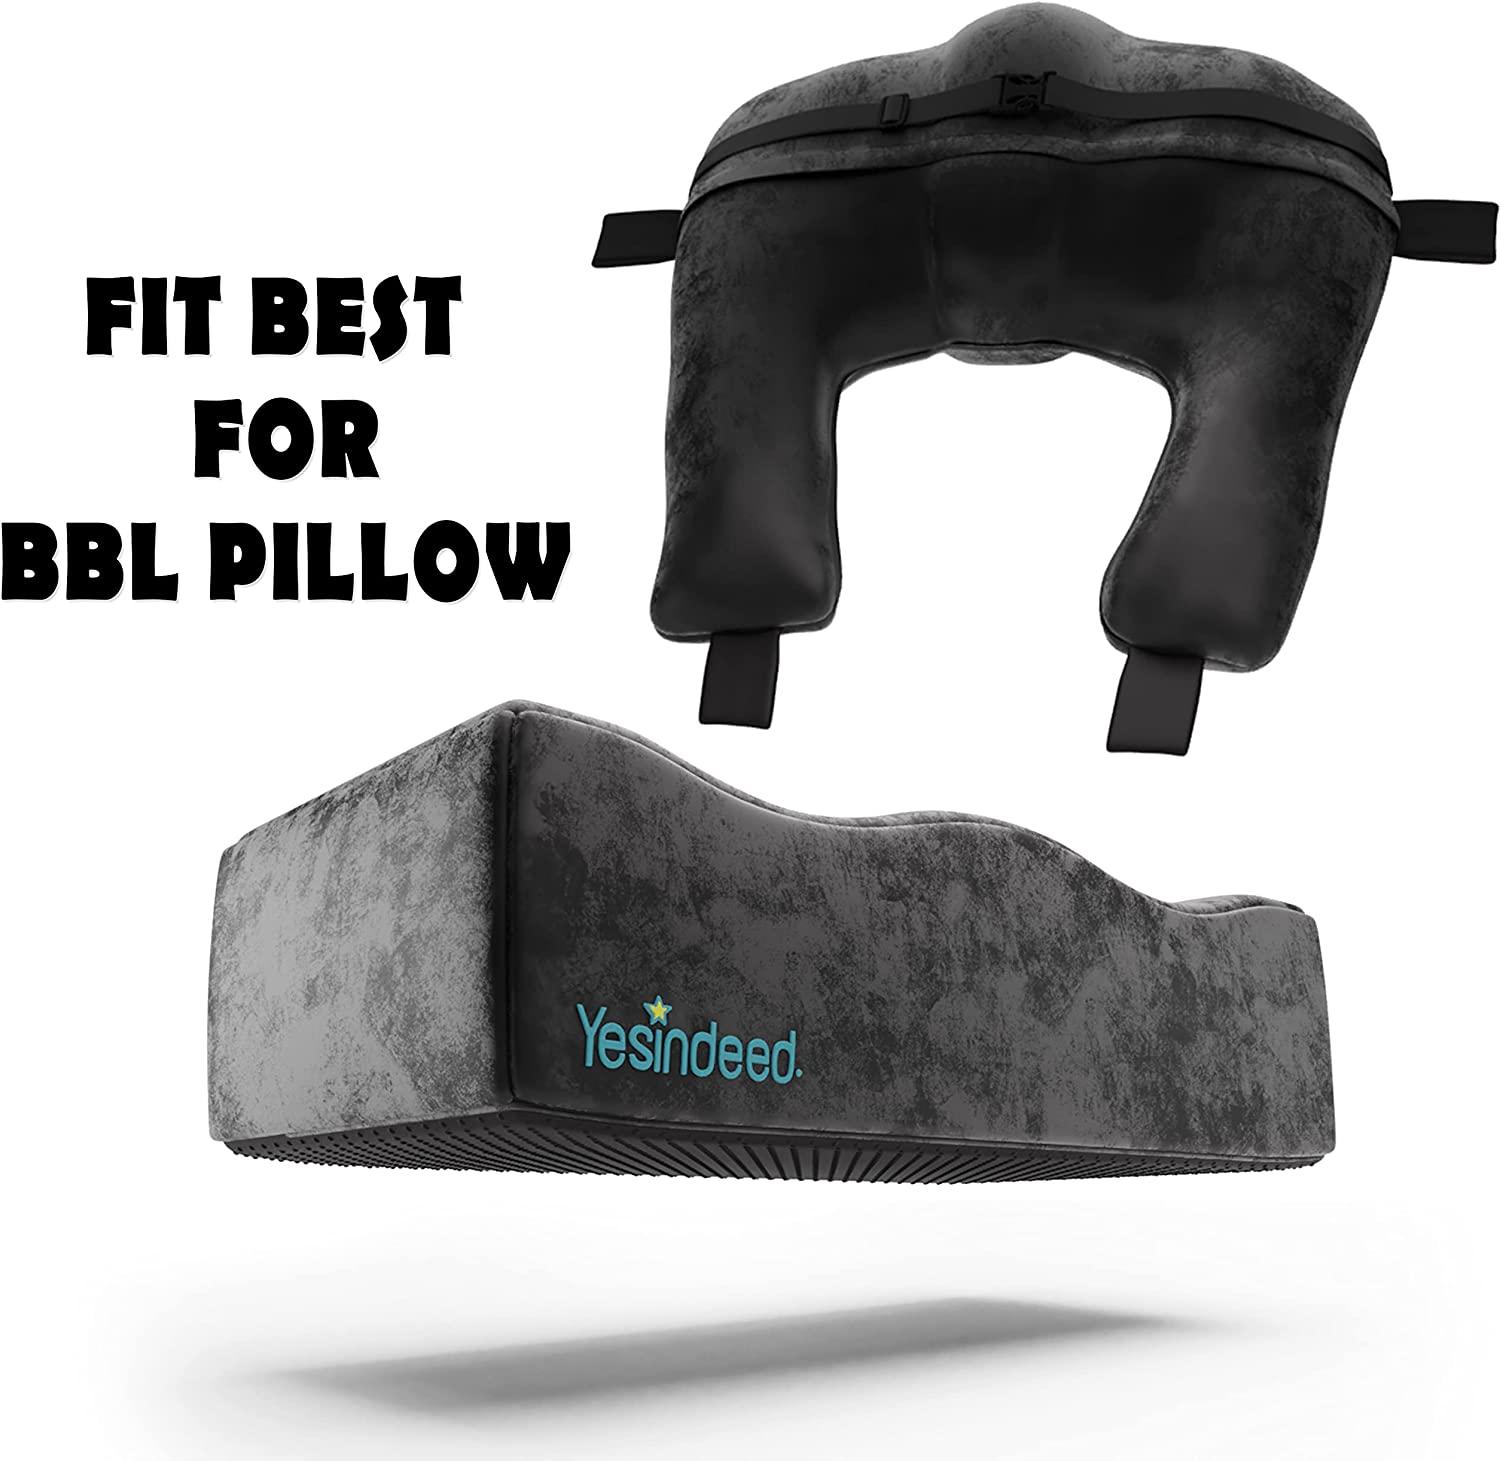 Recovery BBL Pillow - Yesindeed